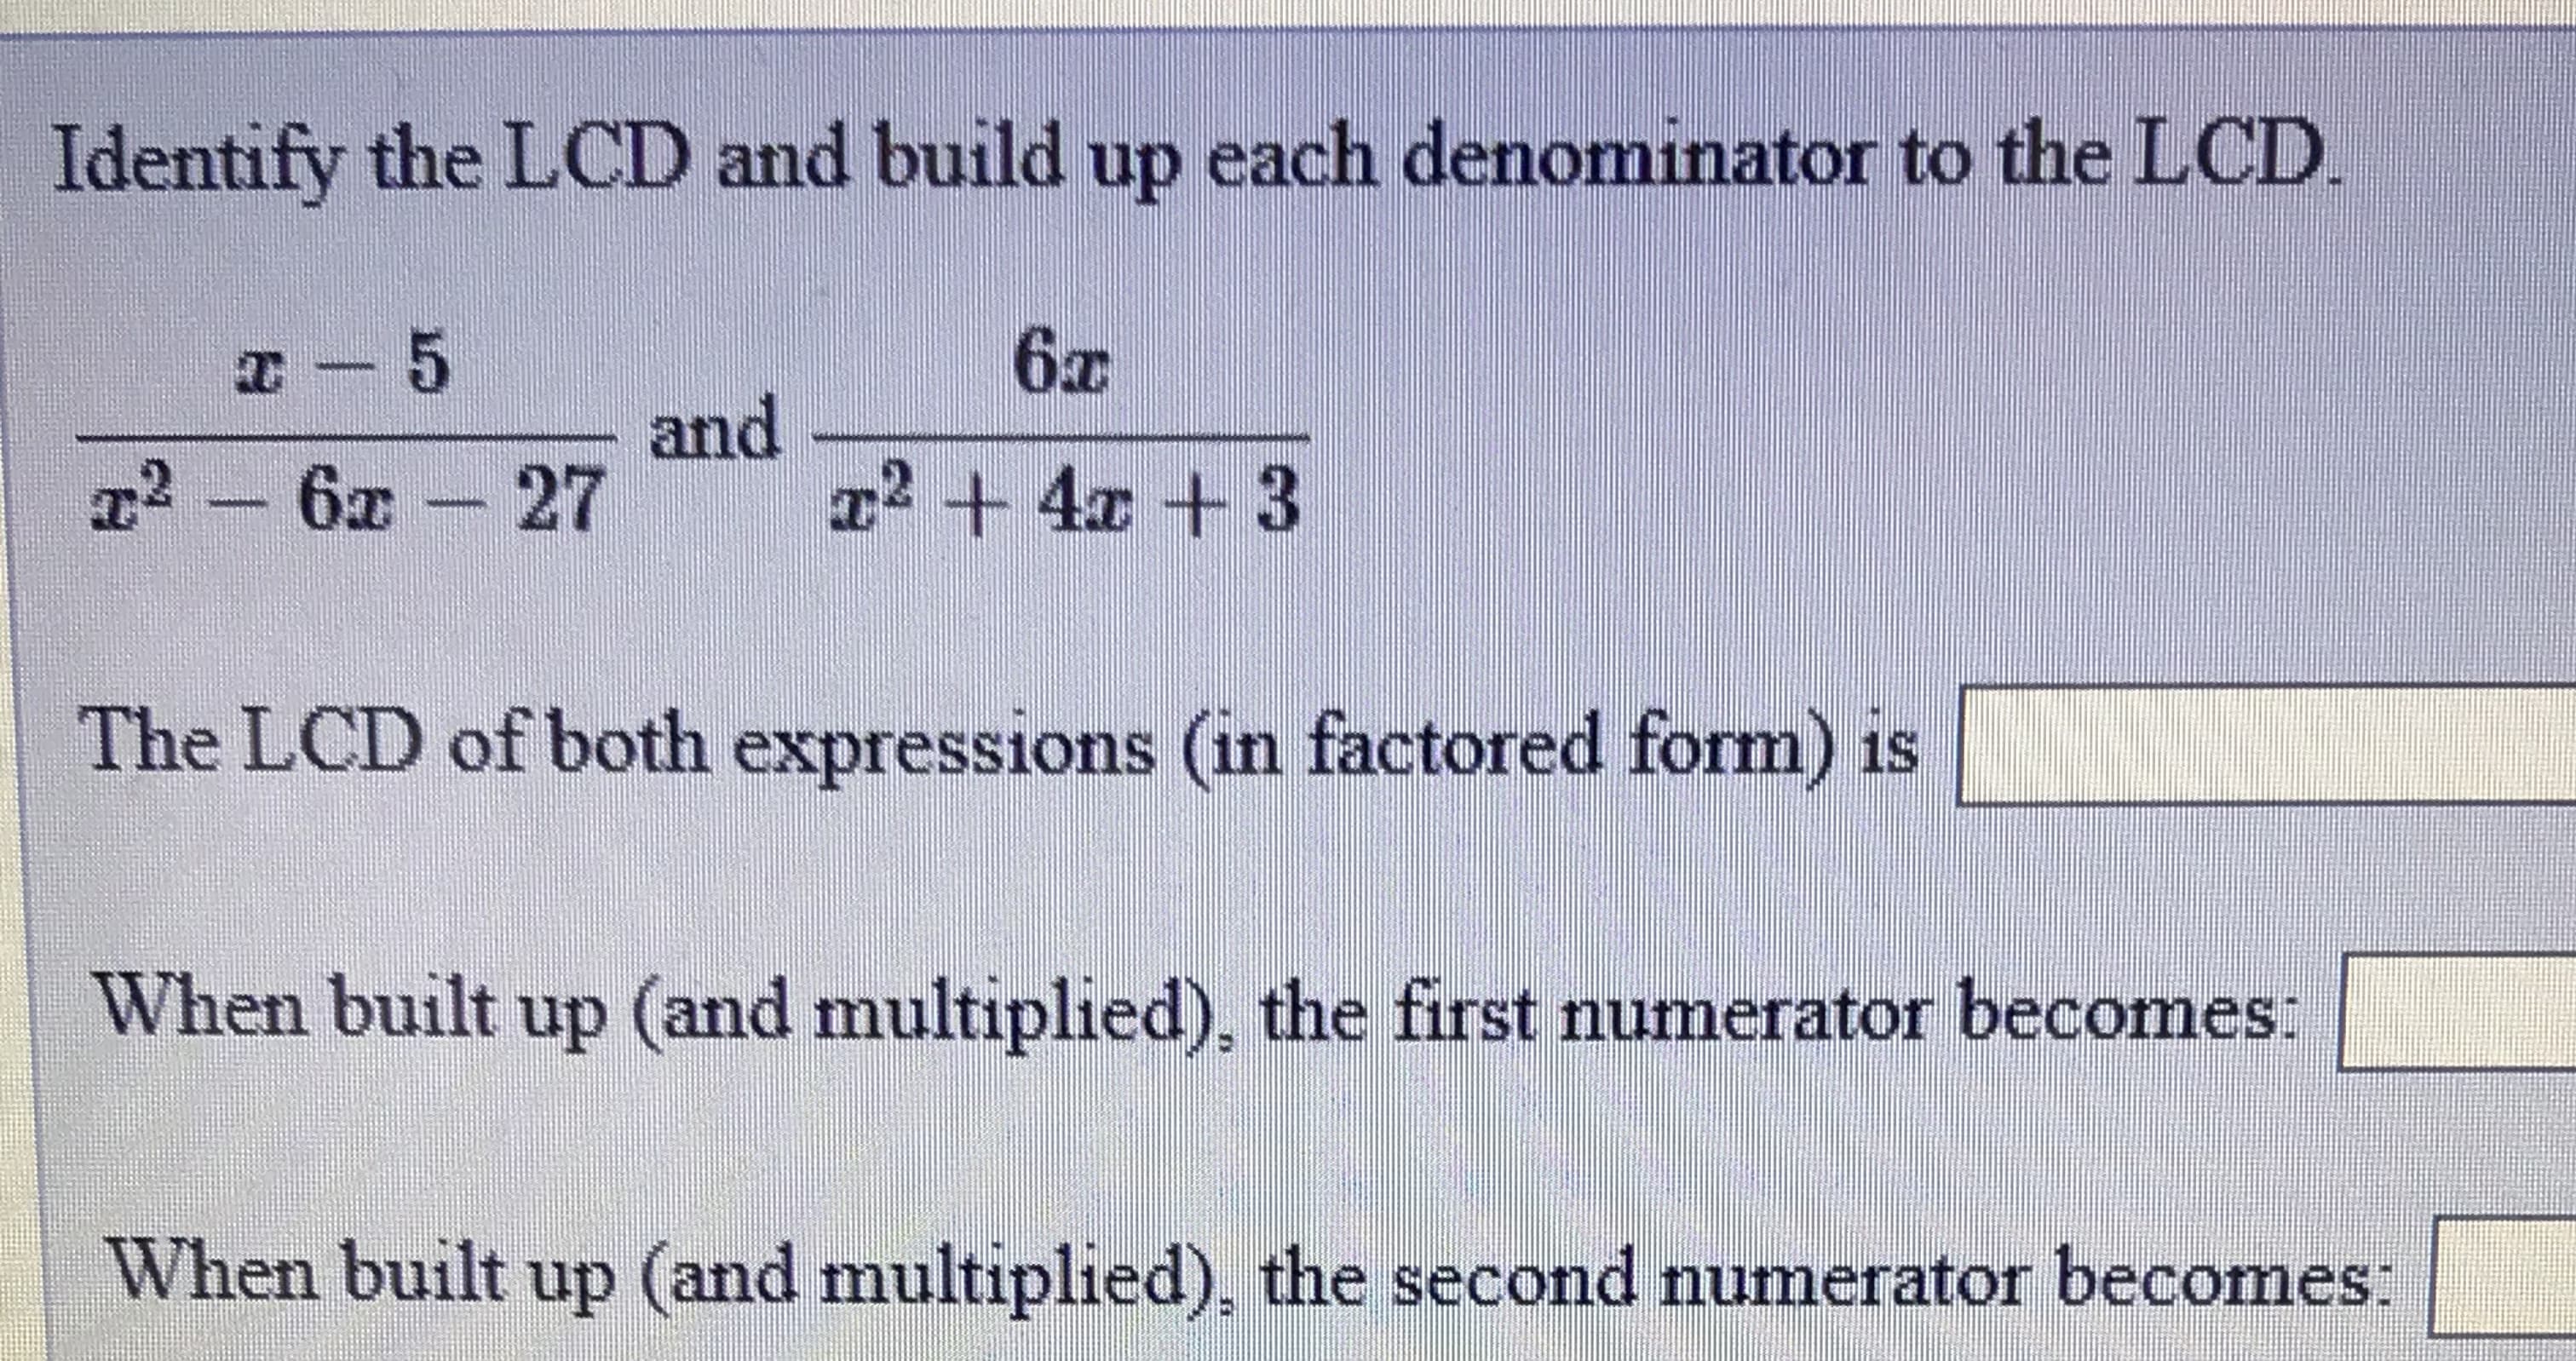 Identify the LCD and build up each denominator to the LCD.
6x
and
T² +4x +3
2 6x 27
The LCD of both expressions (in factored form) is
When built up (and multiplied), the first numerator becomes:
When built up (and multiplied), the second numerator becomes:
